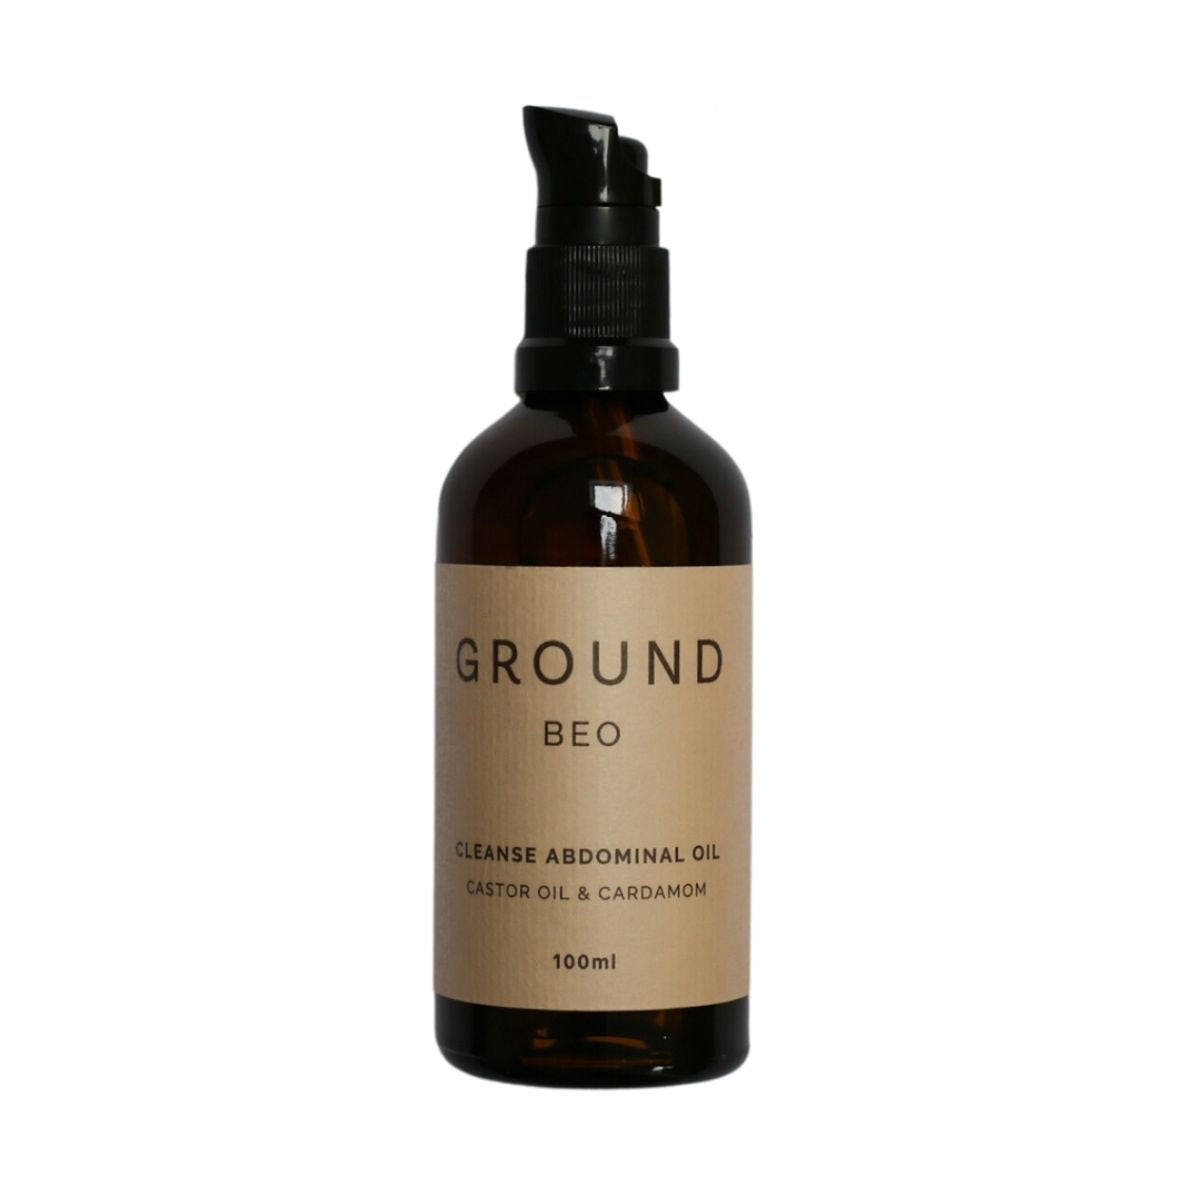 GROUND BEO Uplifting Cleanse Abdominal Oil 100ml